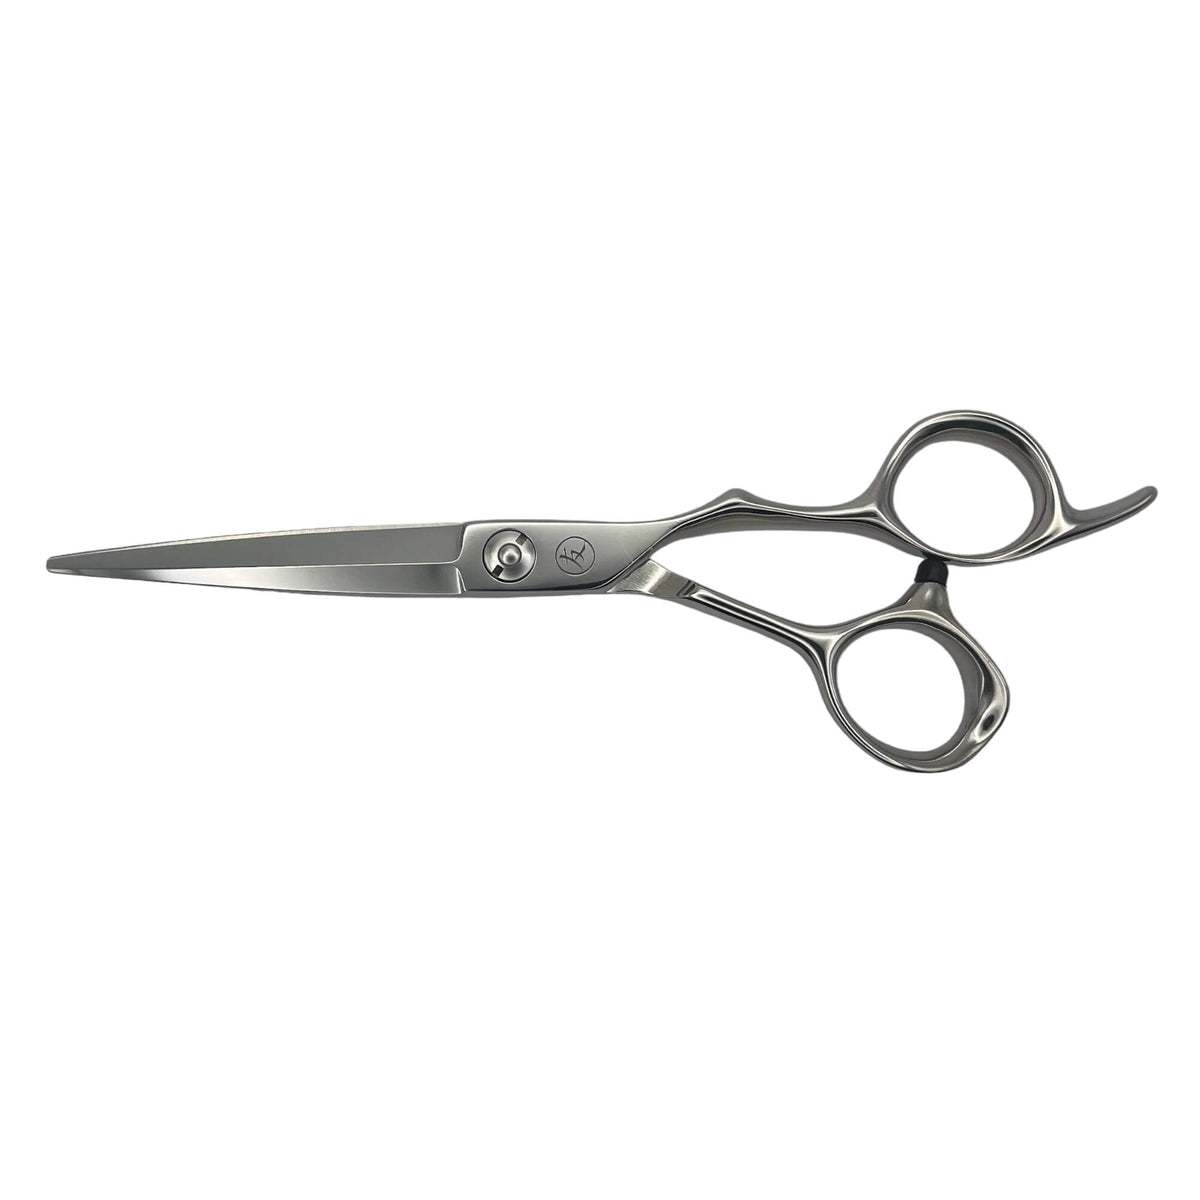 AK Z-1 Master Hairdressing Scissors side angle 6.0 inch